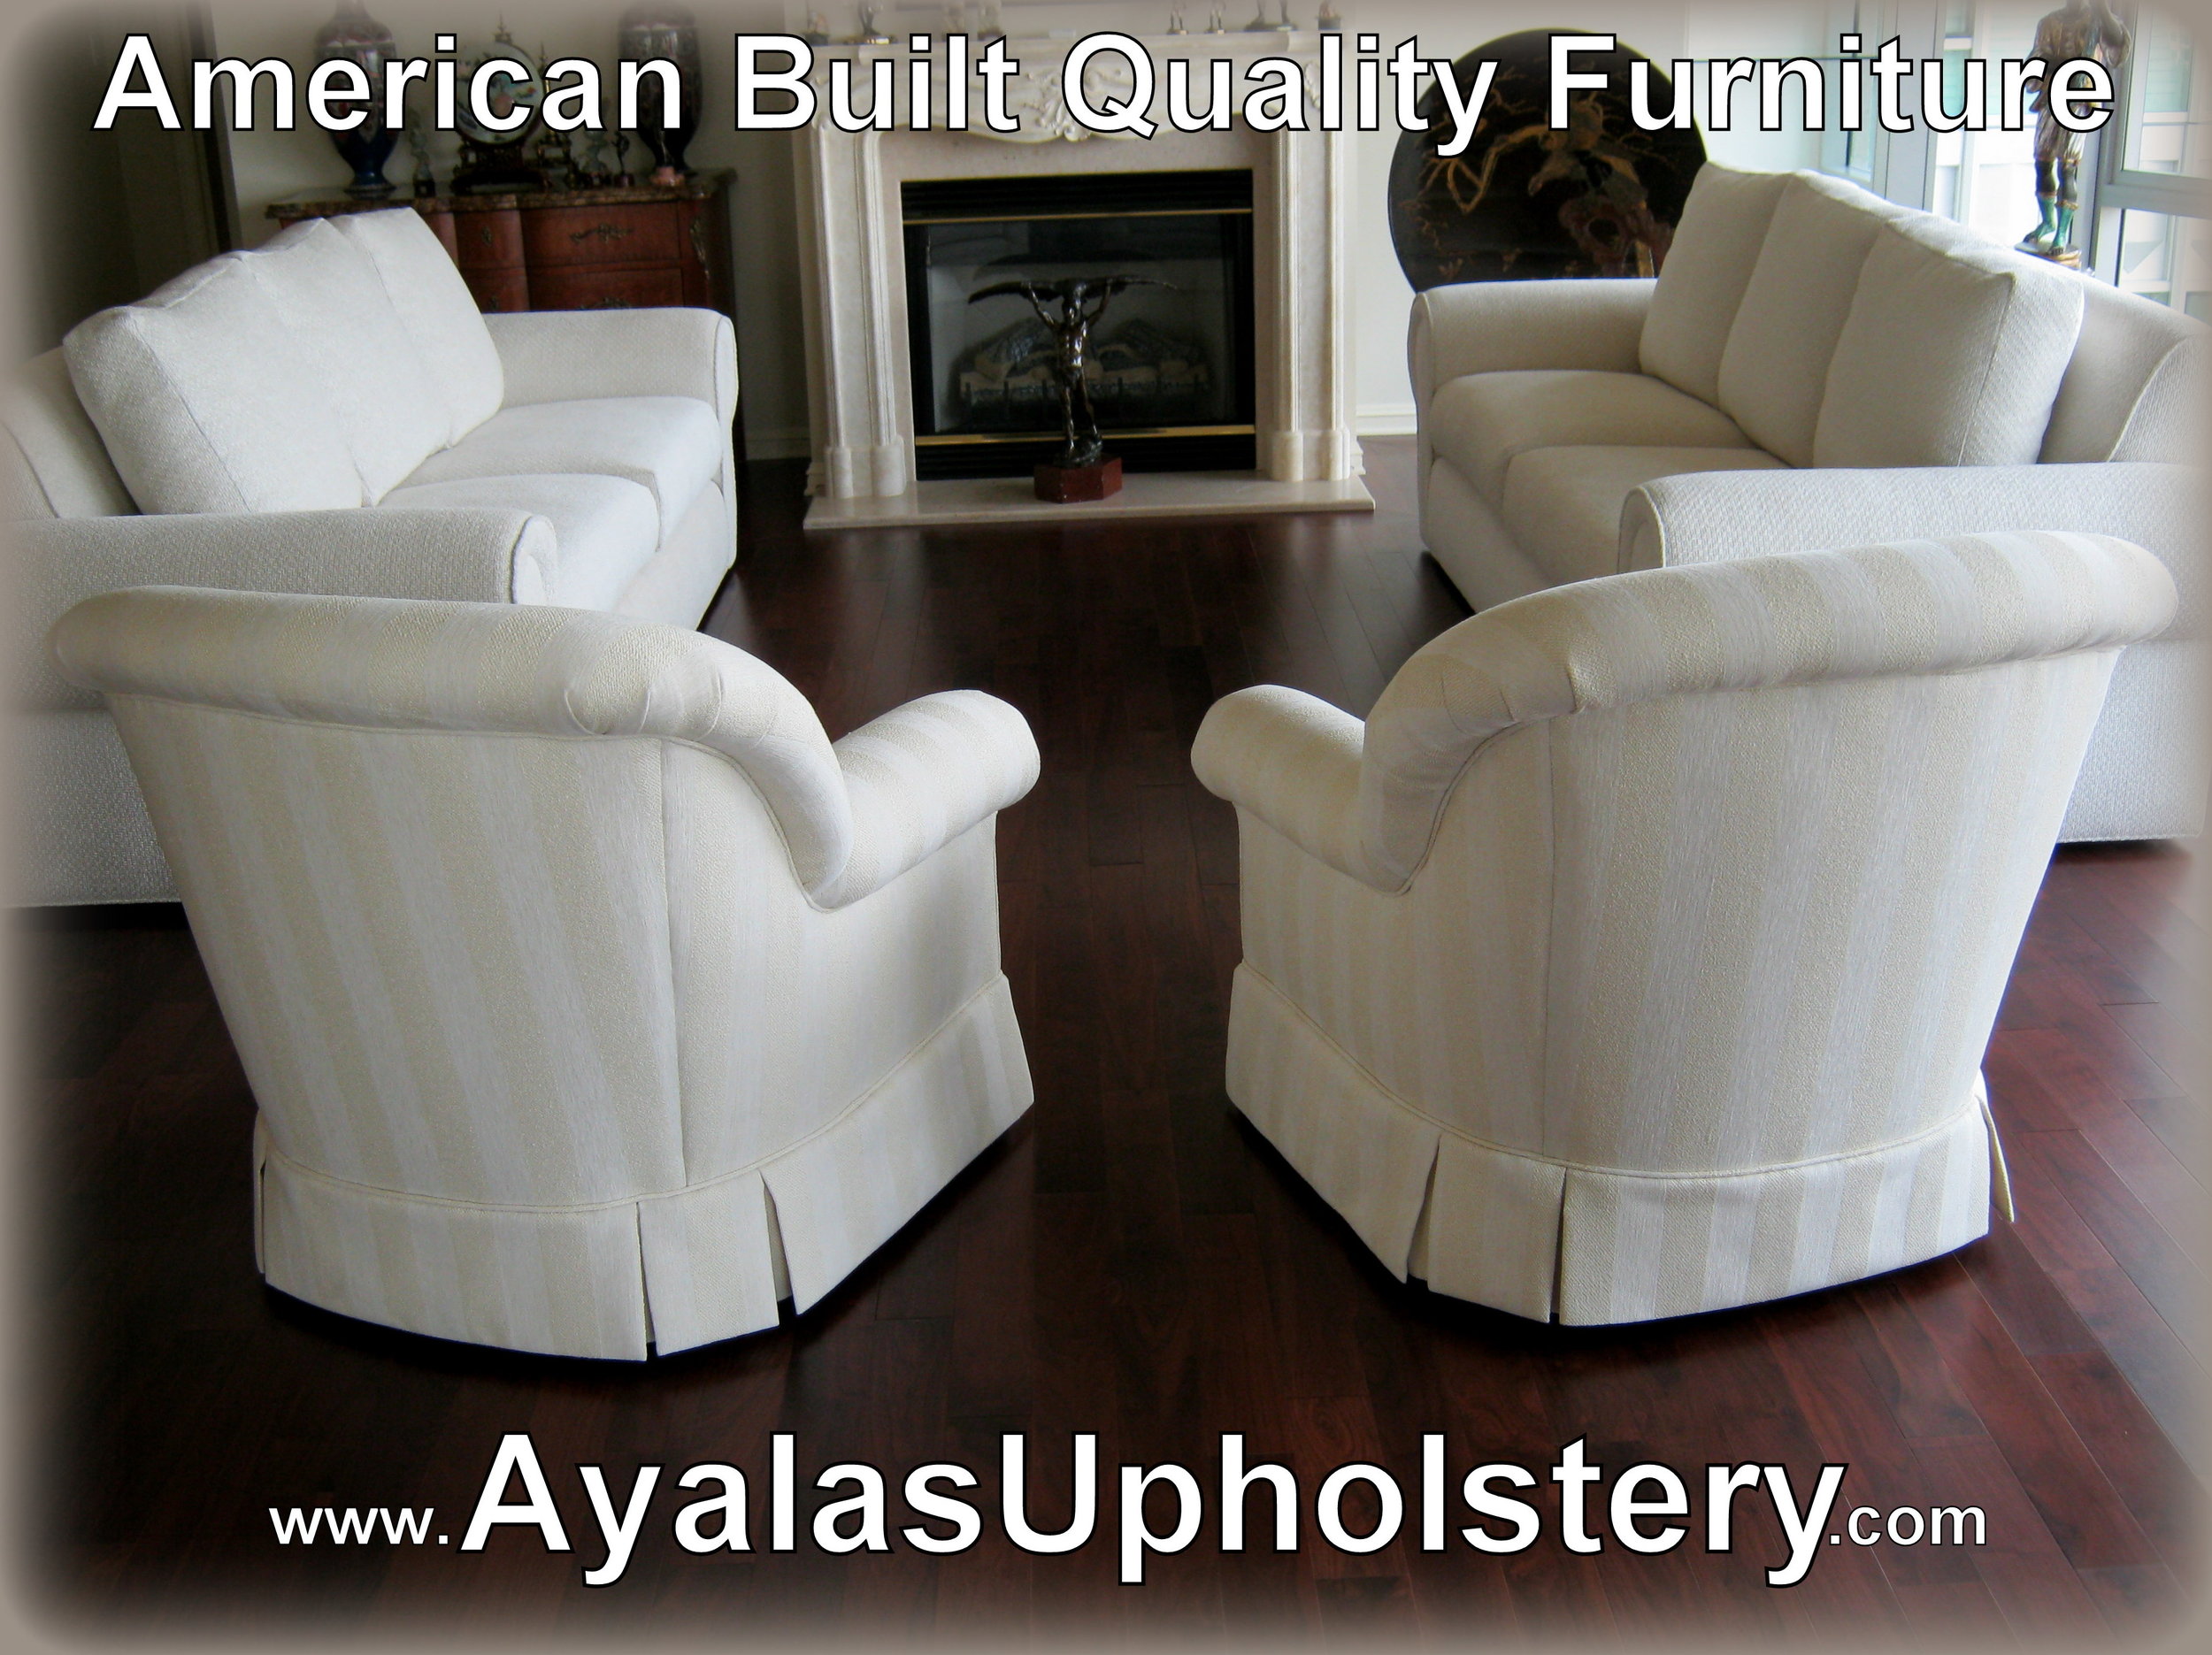 6. white swivel club chairs and 2 matching sofa by Ayalas upholstery.jpg